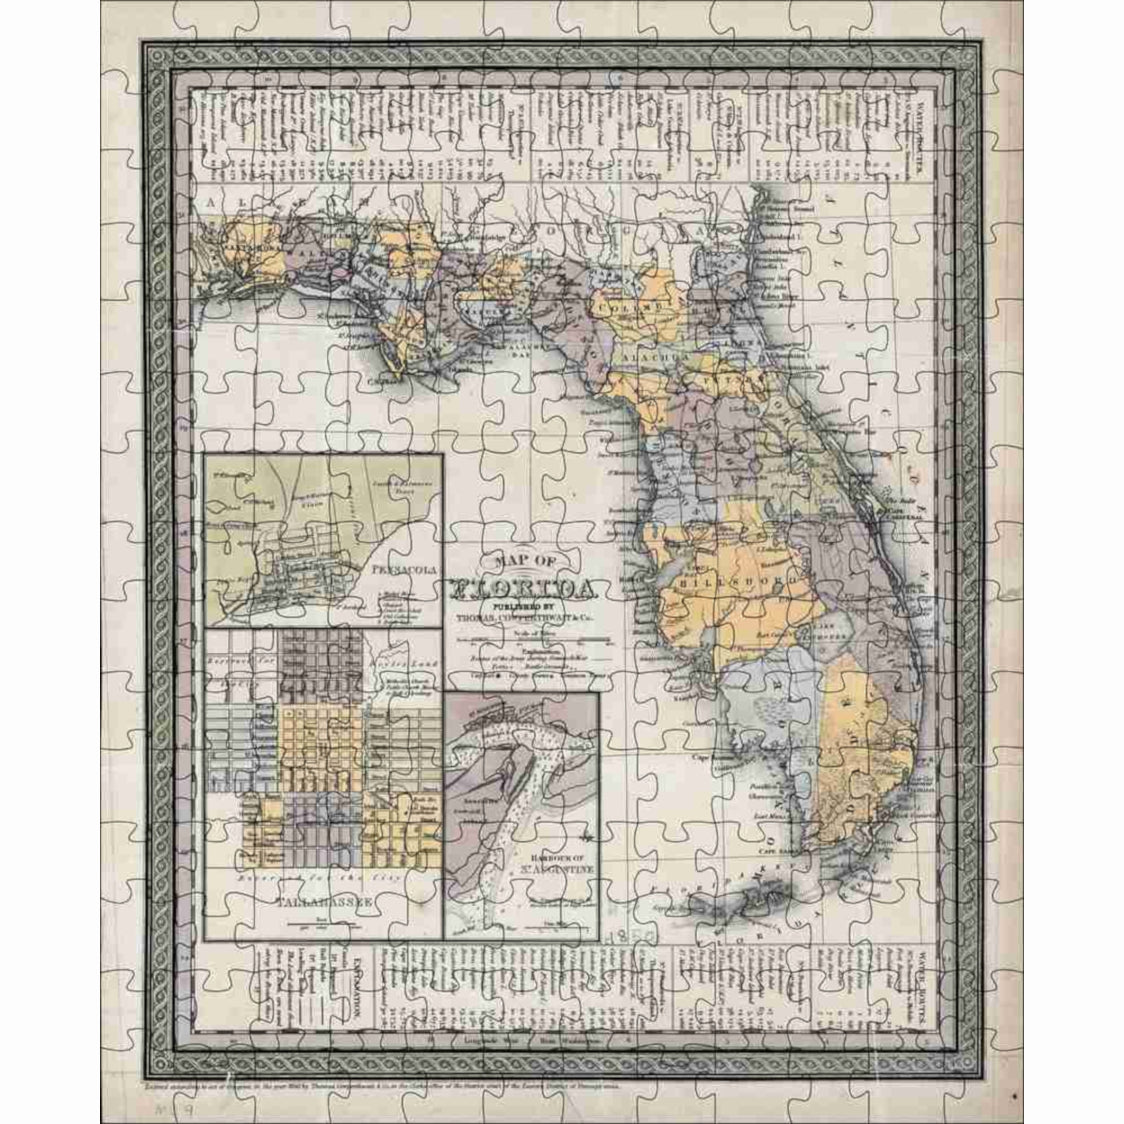 500-piece old Florida map jigsaw puzzle from 1850